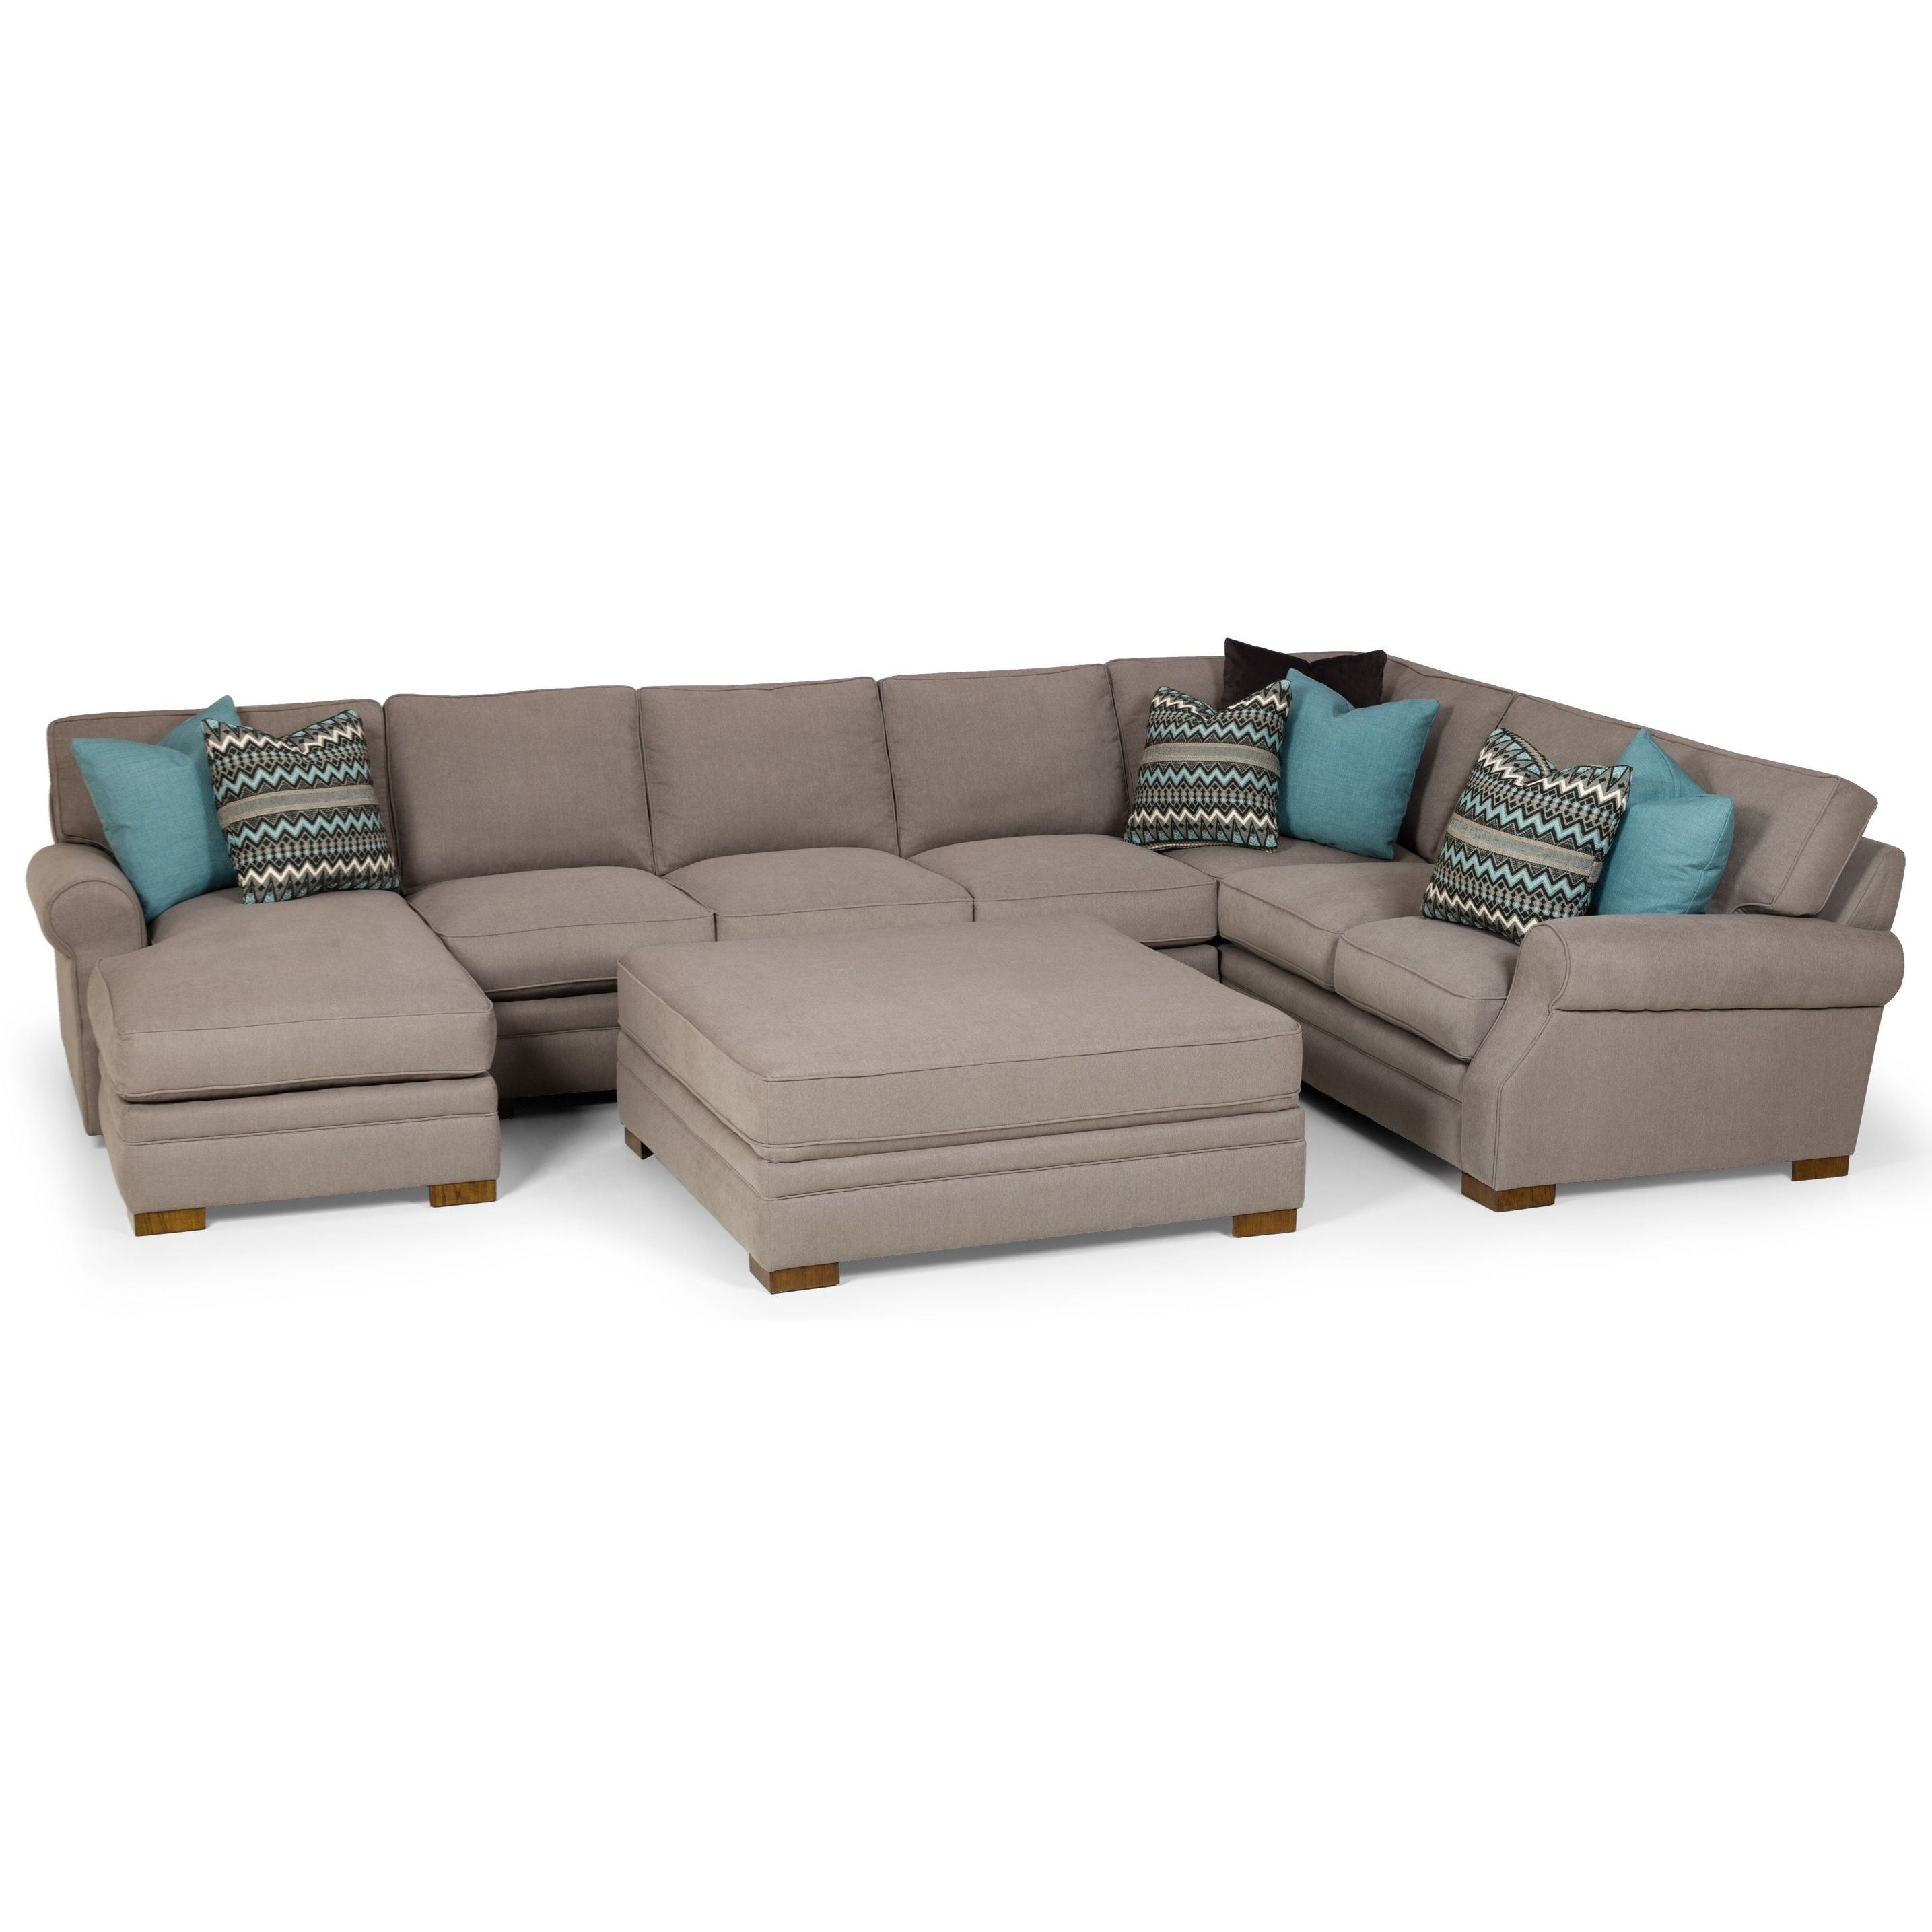 Sunset Home 525 6 Seat U Shape Sectional Sofa With Raf Chaise | Sadler's  Home Furnishings | Sectional Sofas In 6 Seater Sectional Couches (Gallery 8 of 20)